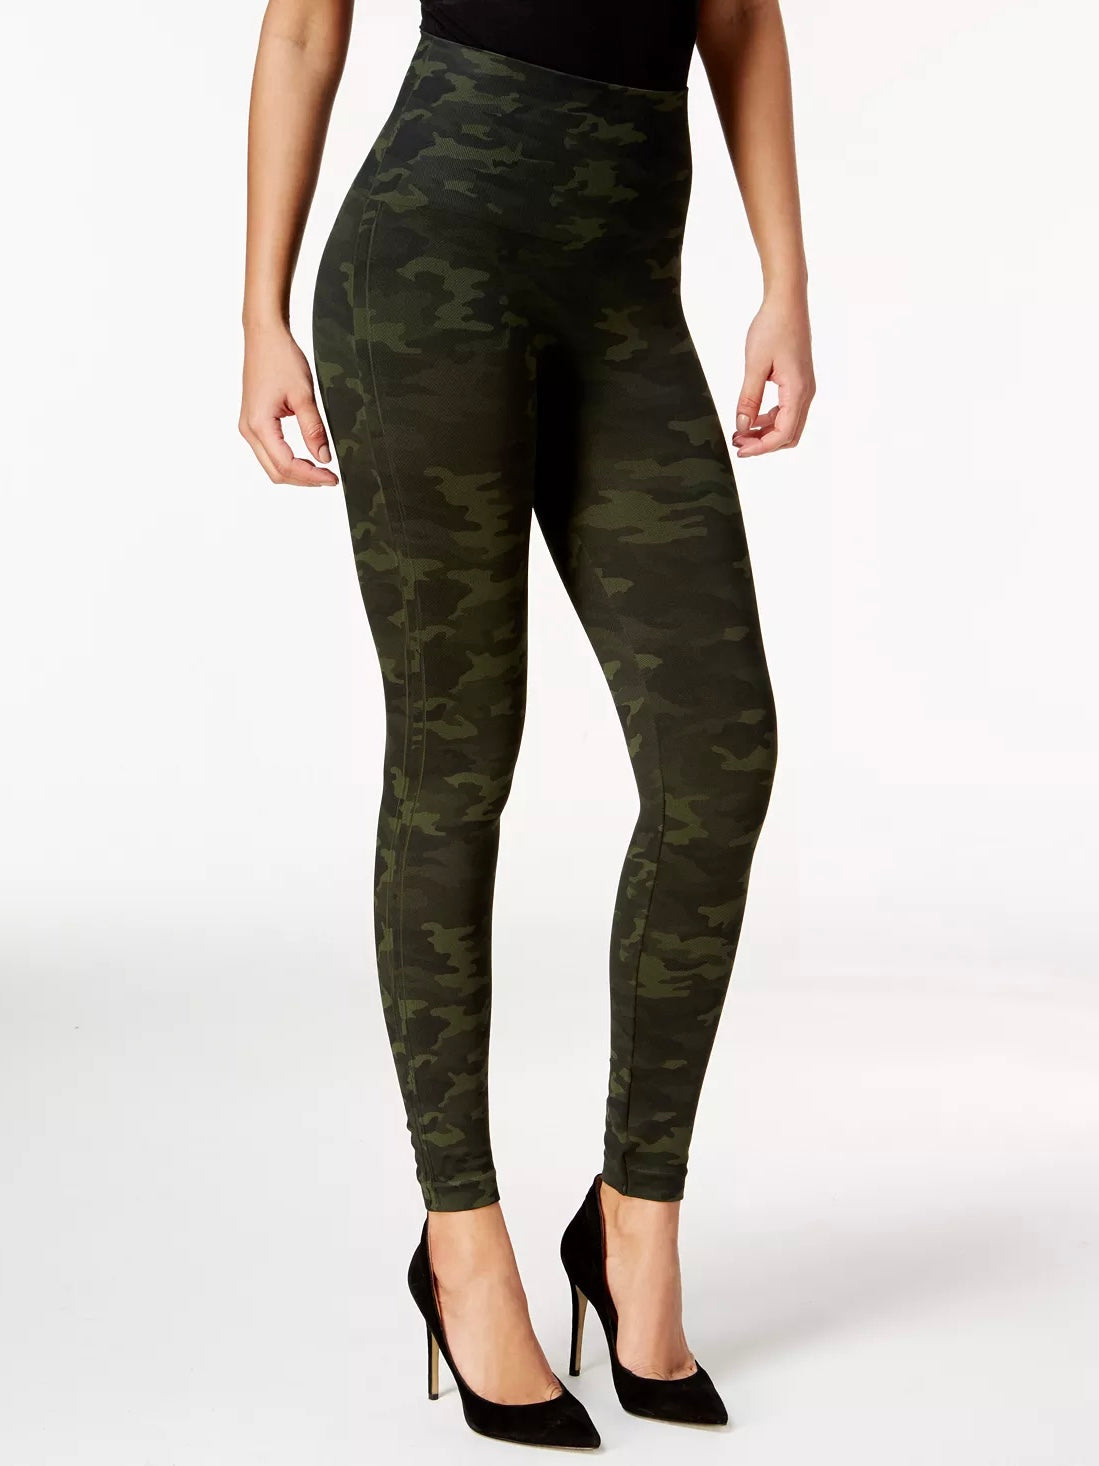 Spanx Seamless Look At Me Now Leggings- Green Camo – Davis Country Store